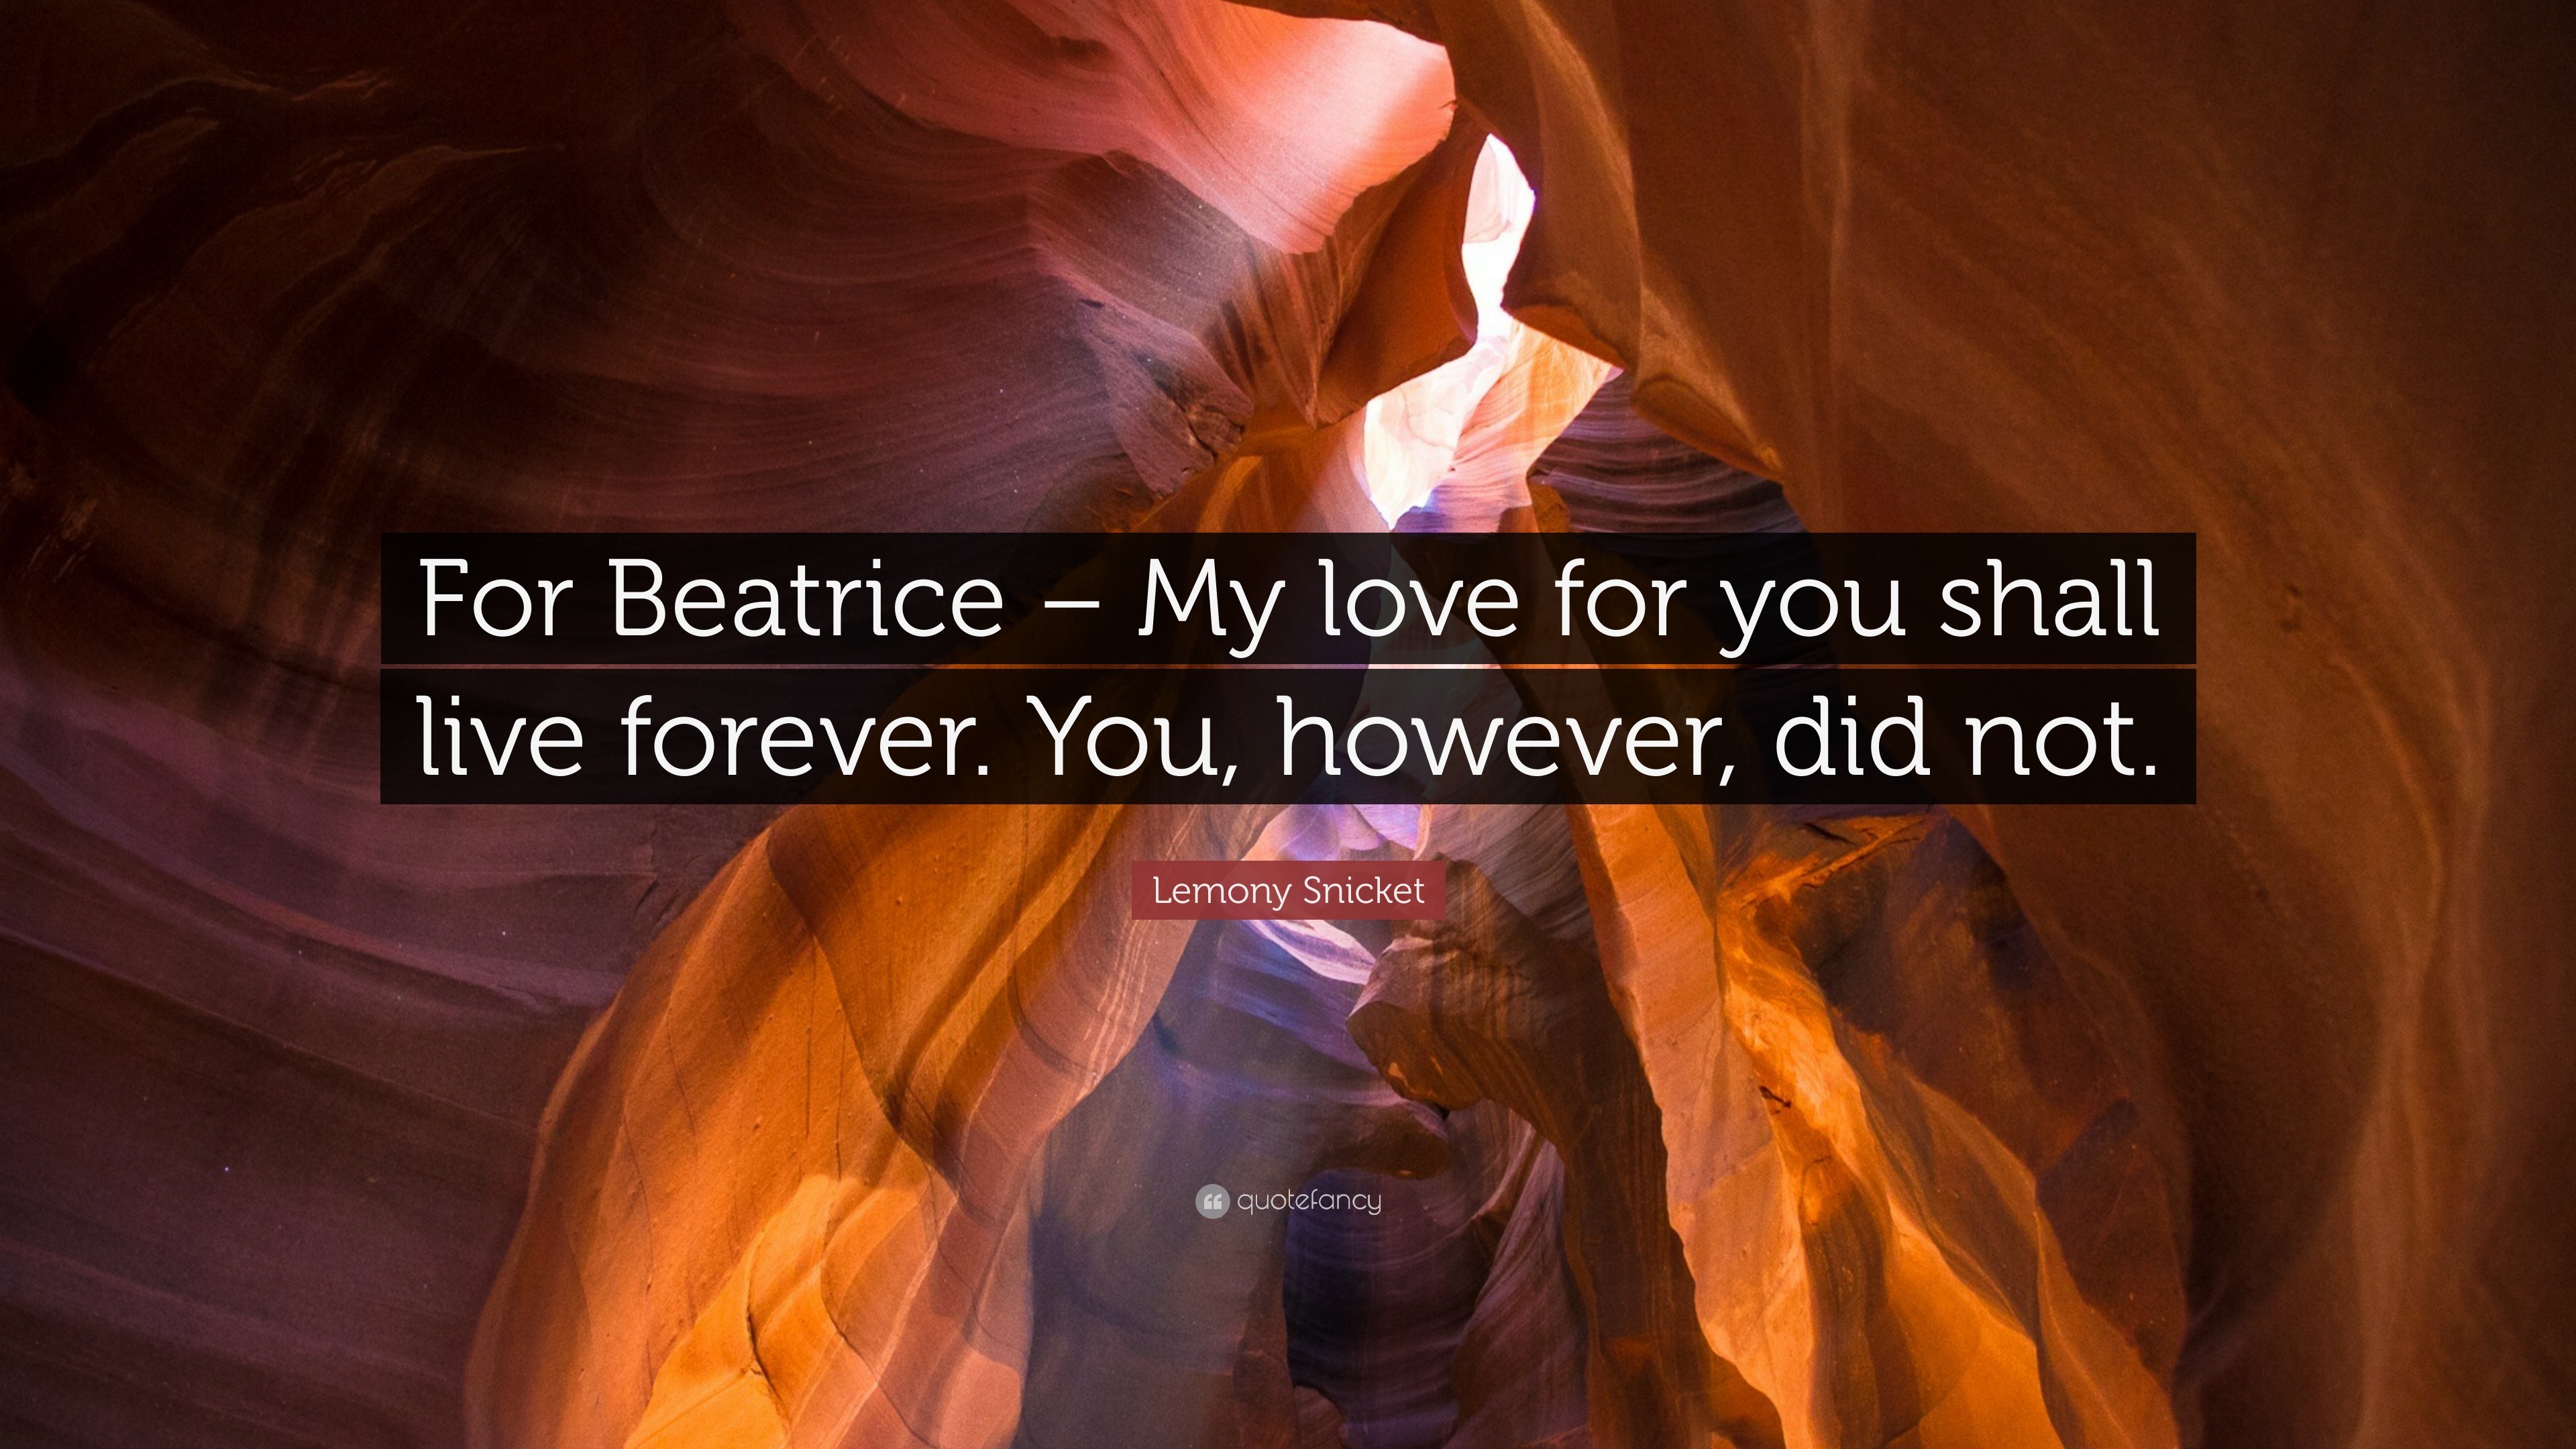 Lemony Snicket Quote “For Beatrice – My love for you shall live forever